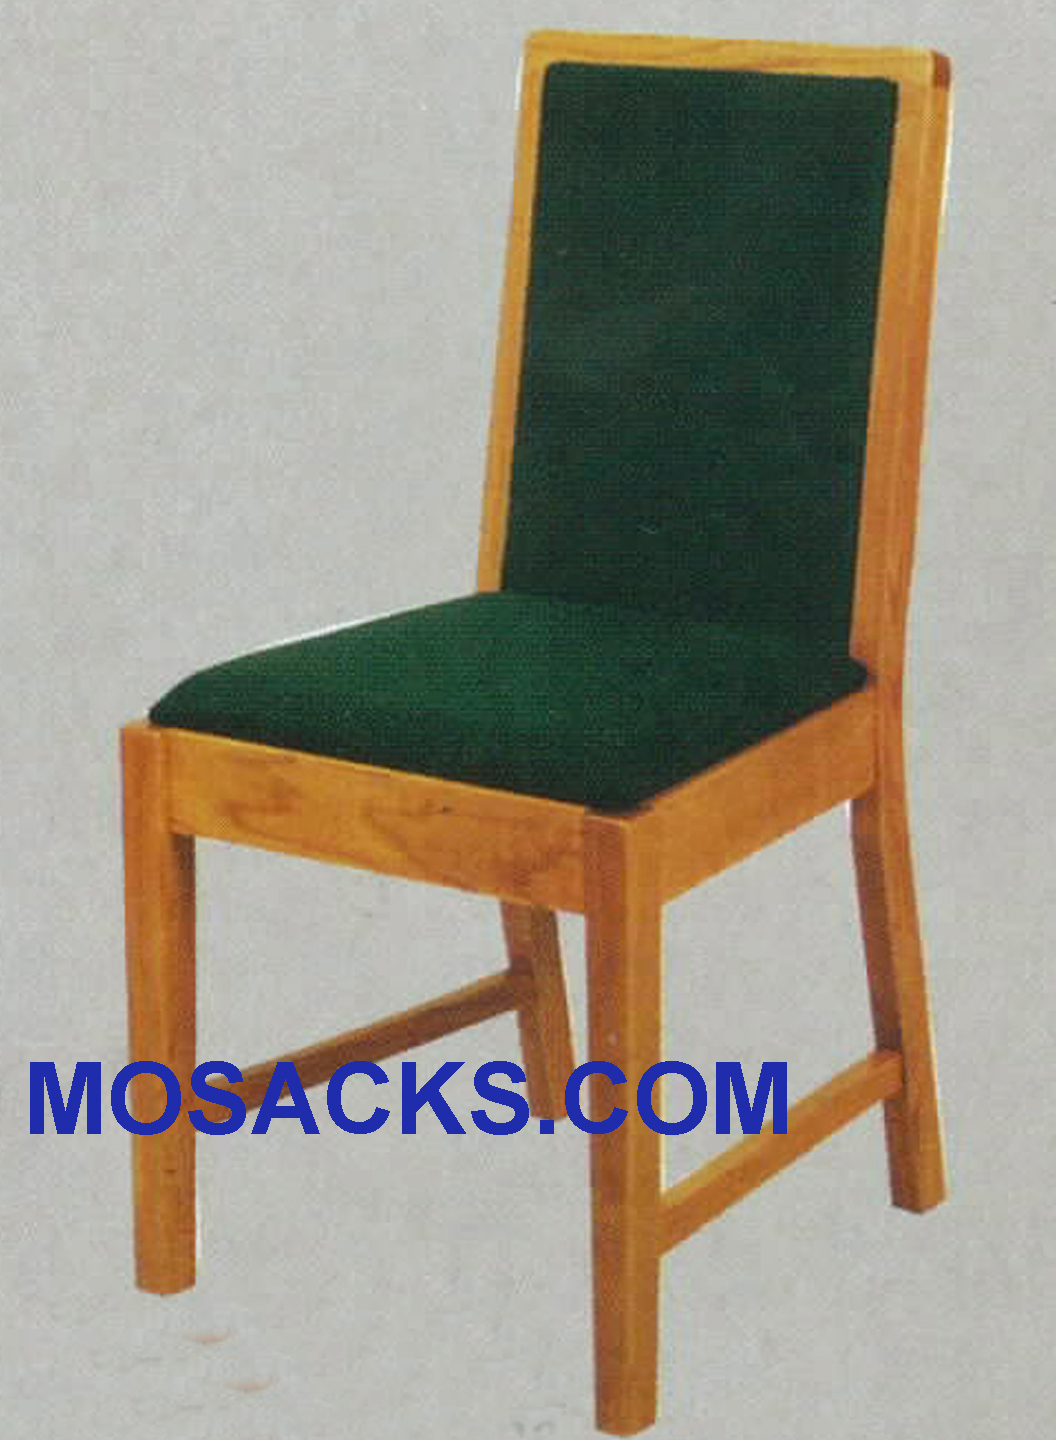 Side Chair 20" w x 18" d 35" h 170S